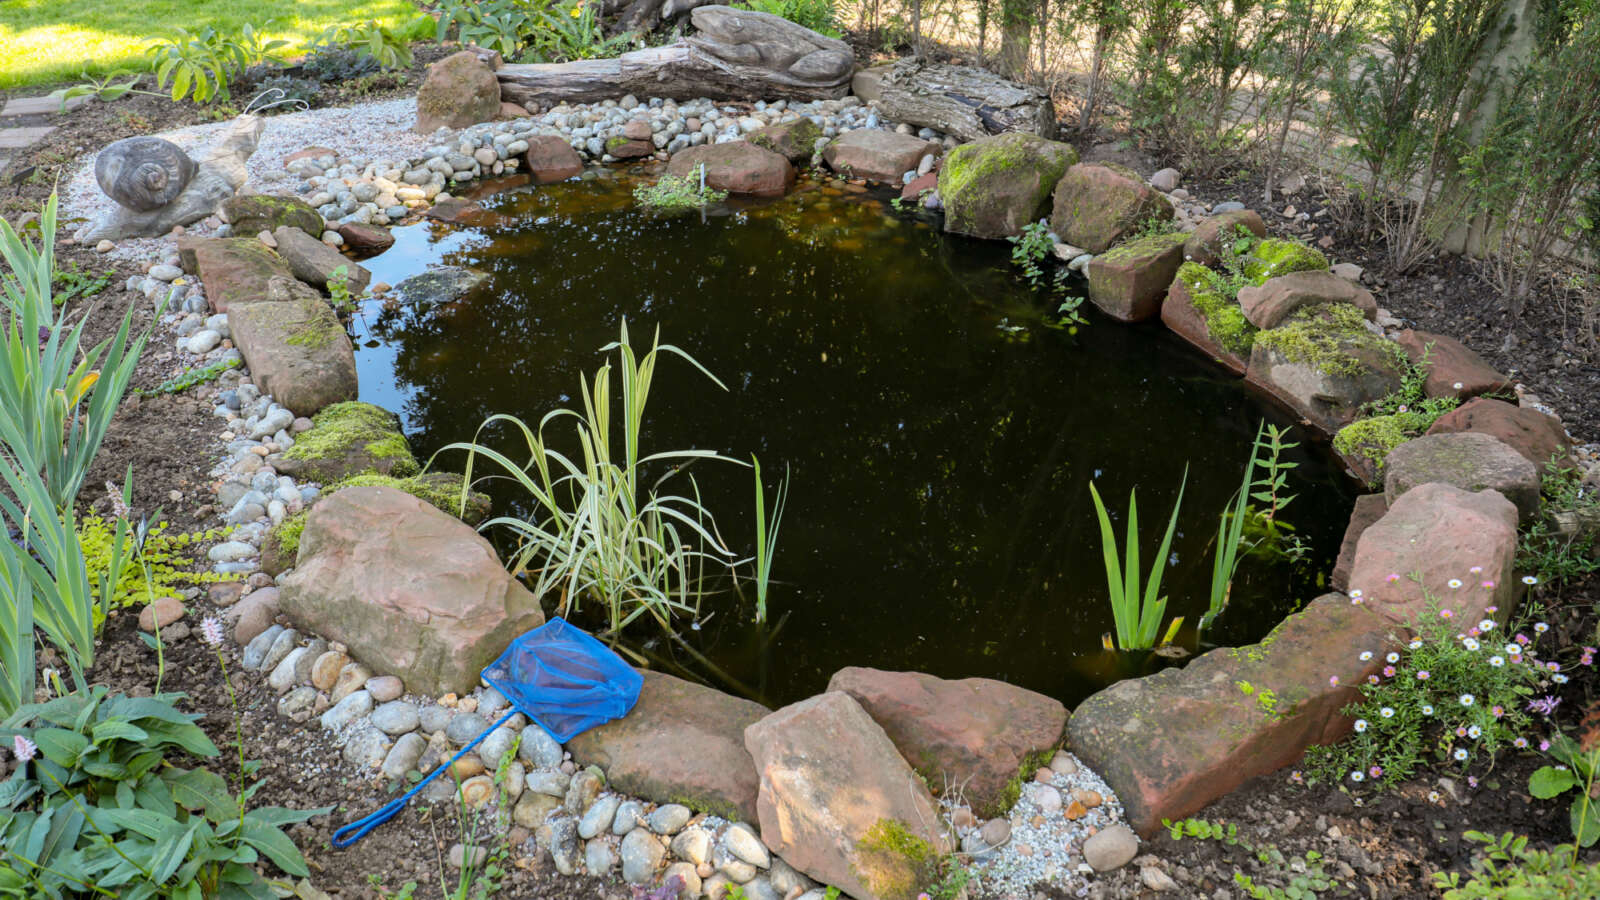 The wildlife pond in February